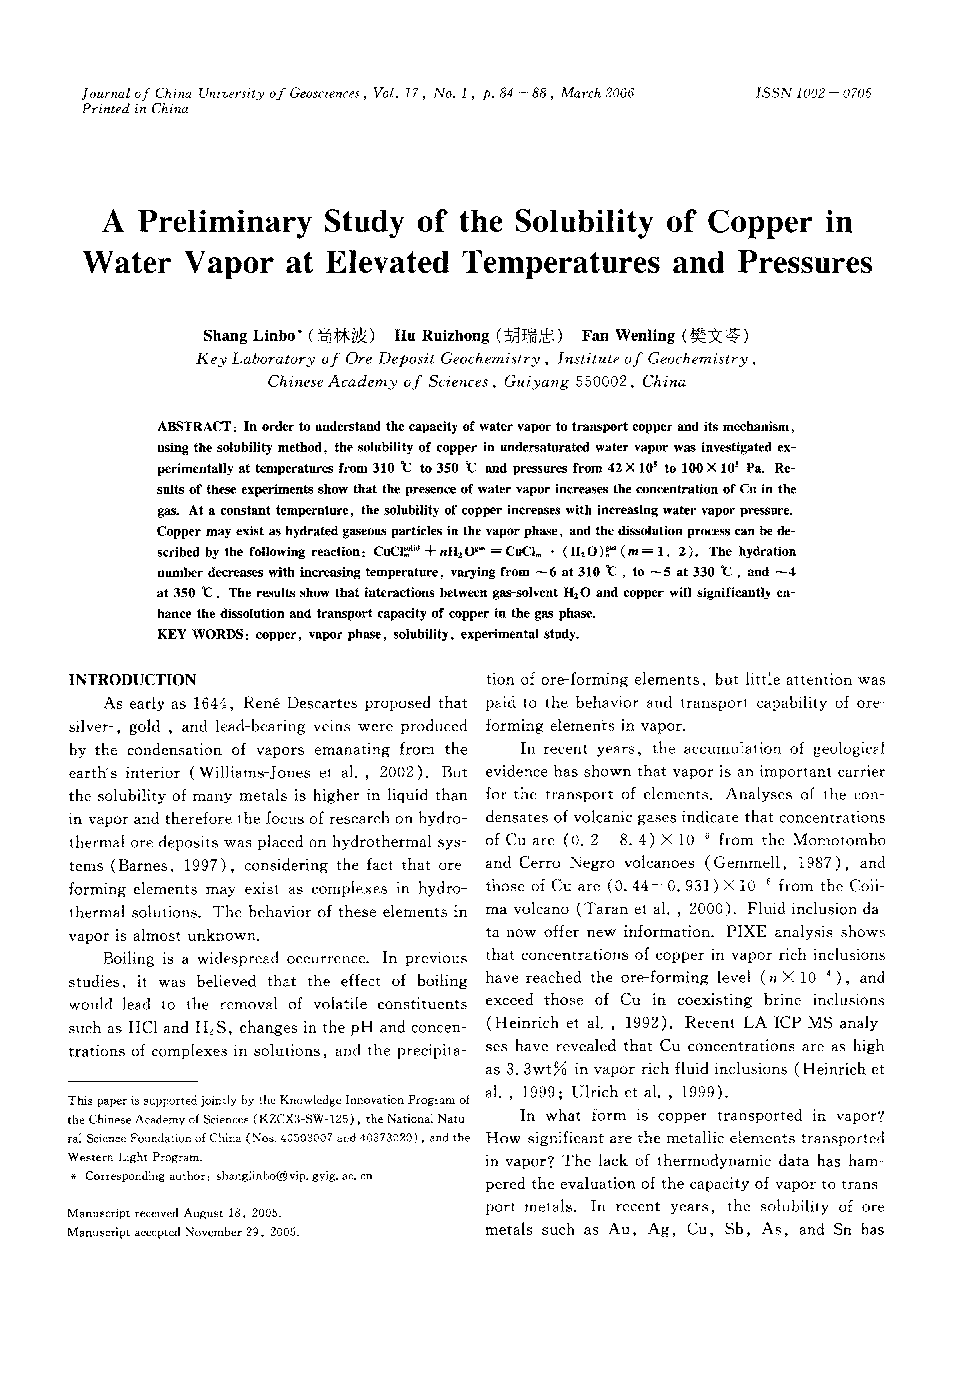 A Preliminary Study of the Solubility of Copper in Water Vapor at Elevated Temperatures and Pressures